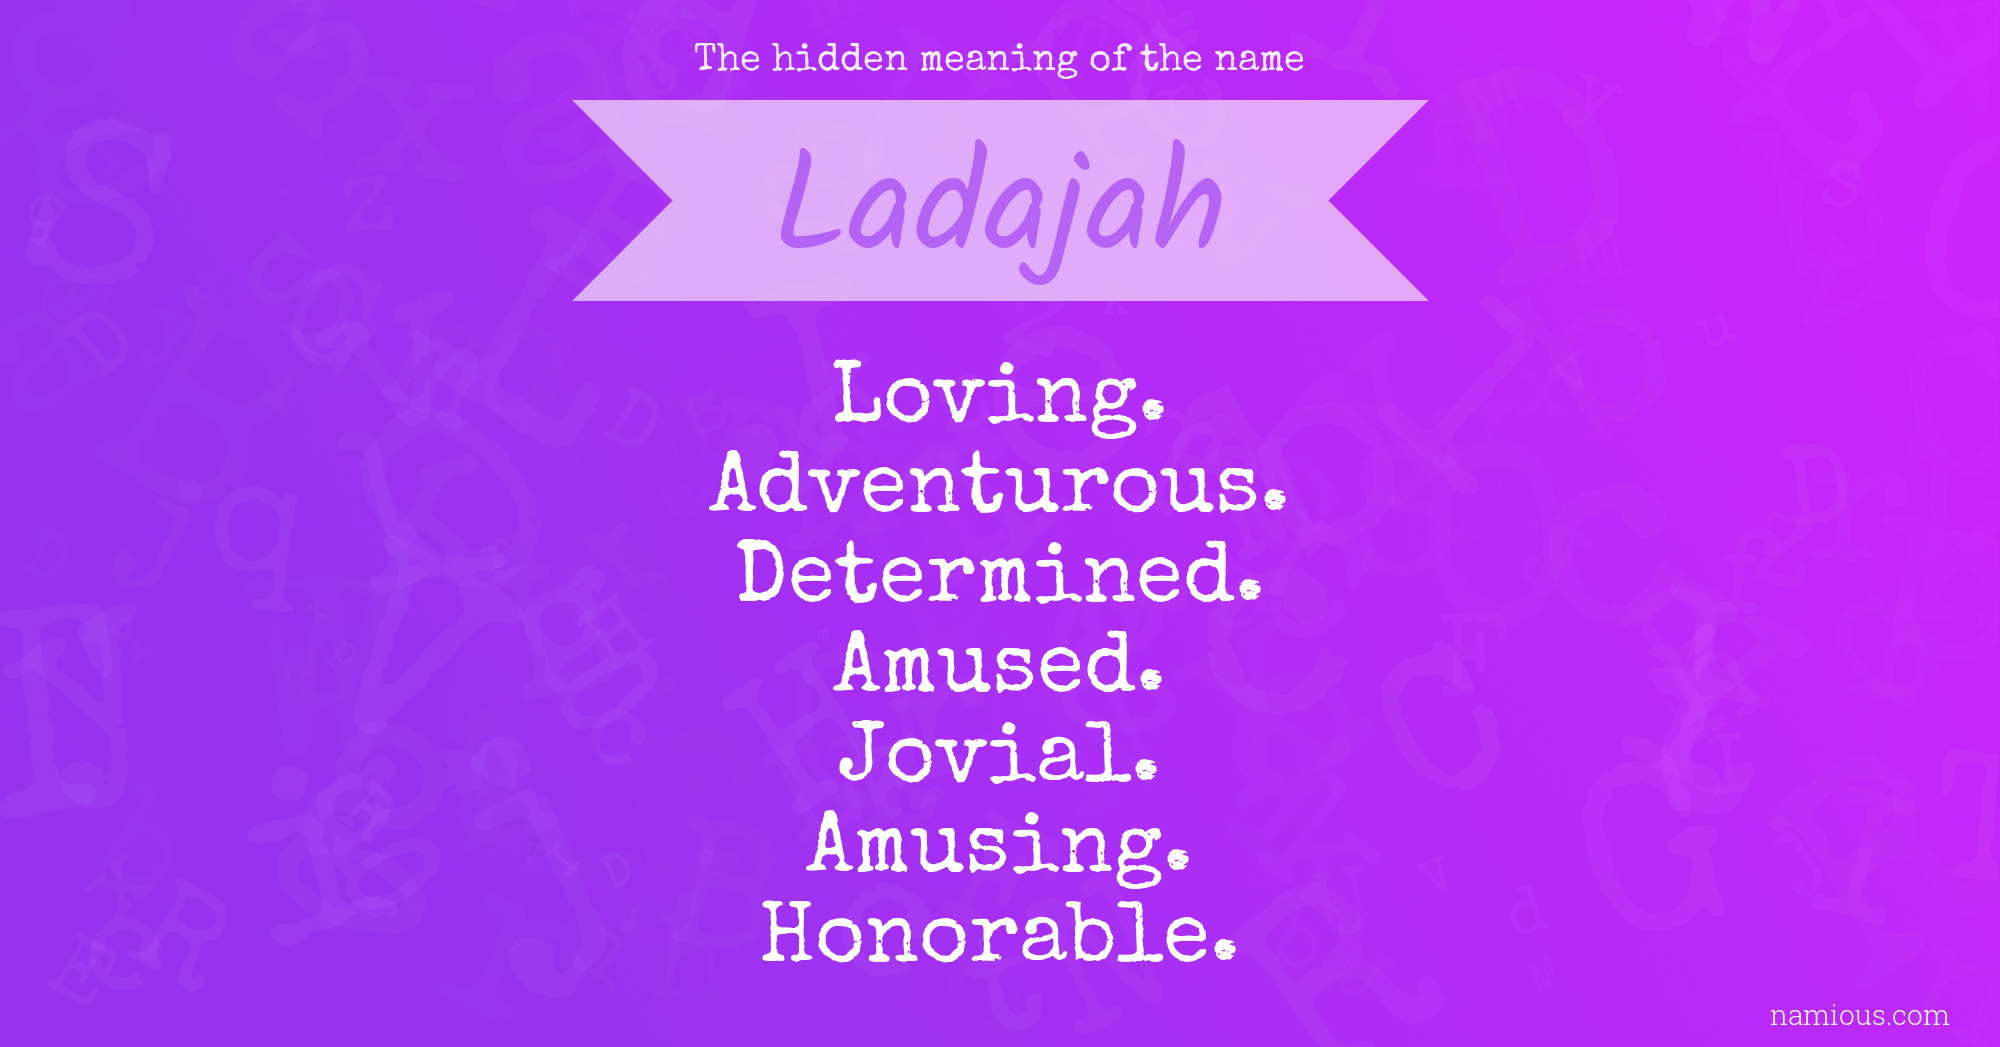 The hidden meaning of the name Ladajah